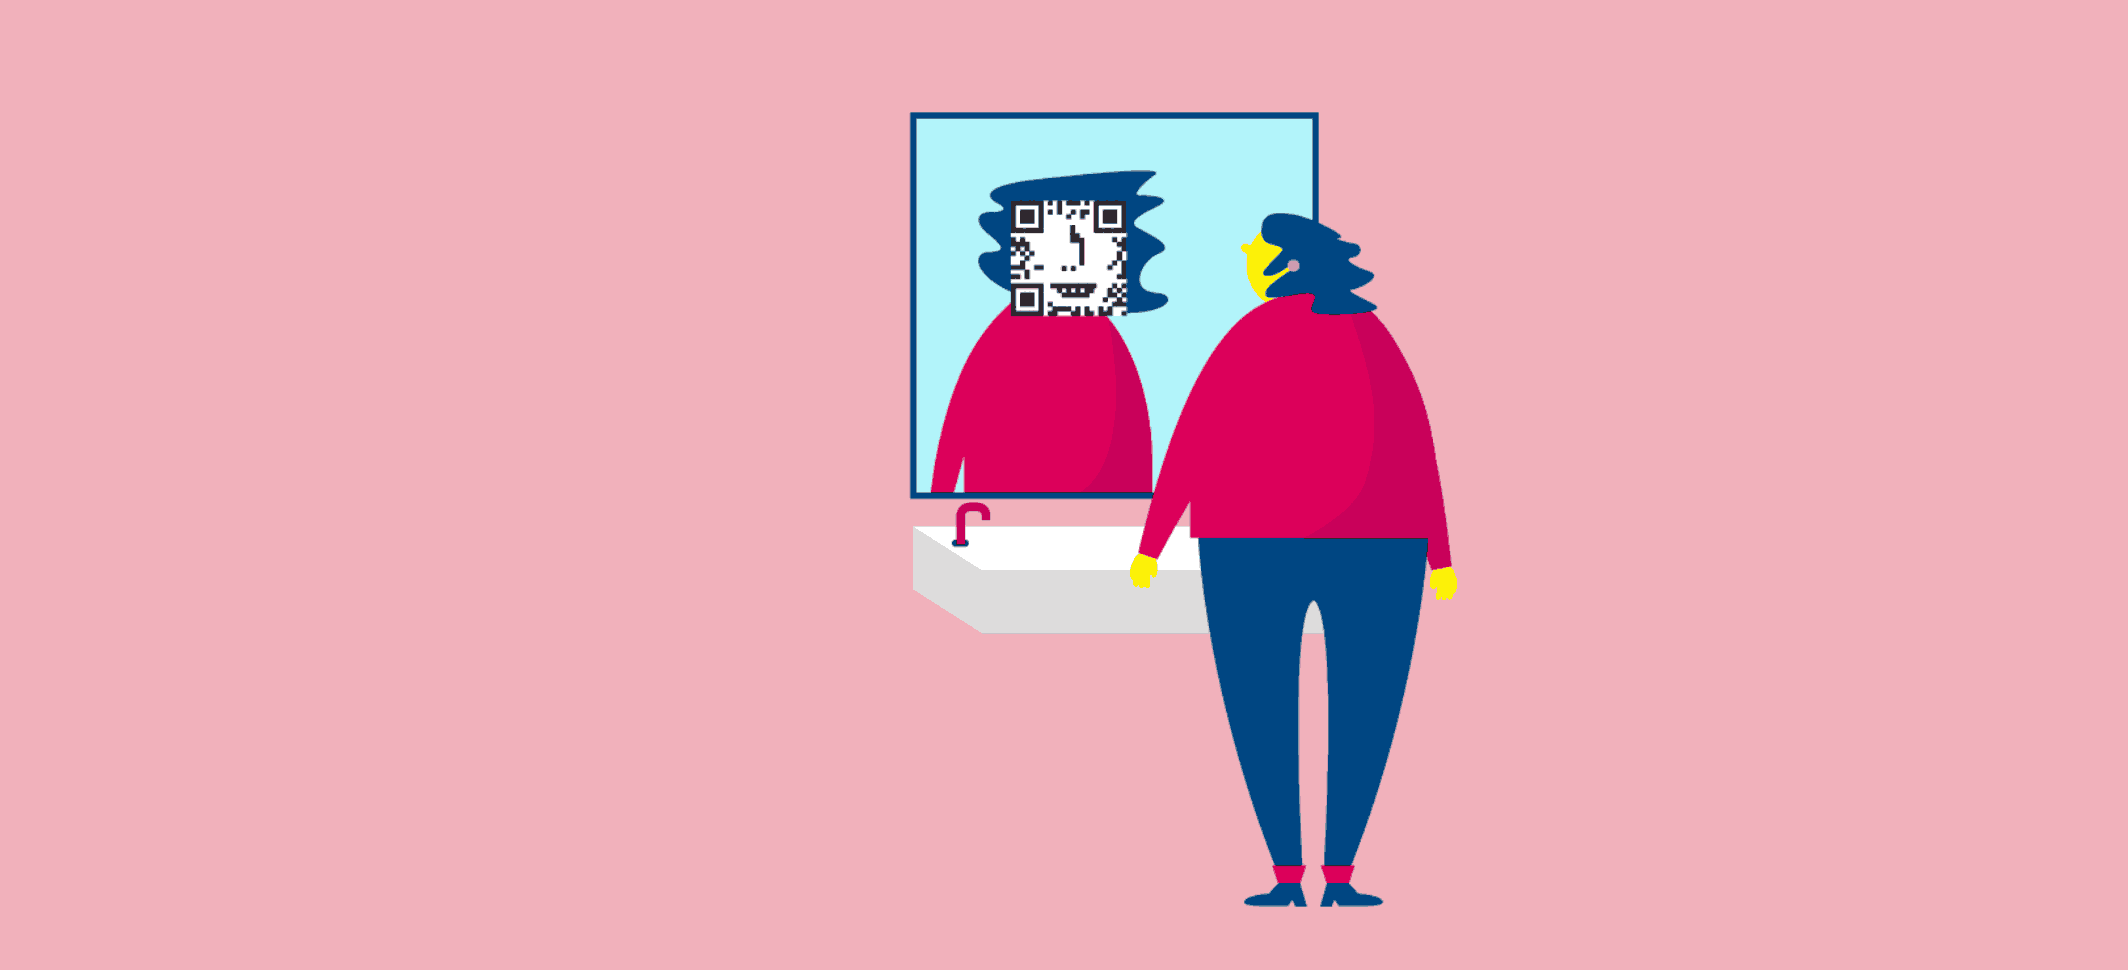 Person looking into a mirror in which their pixelated reflection is visible